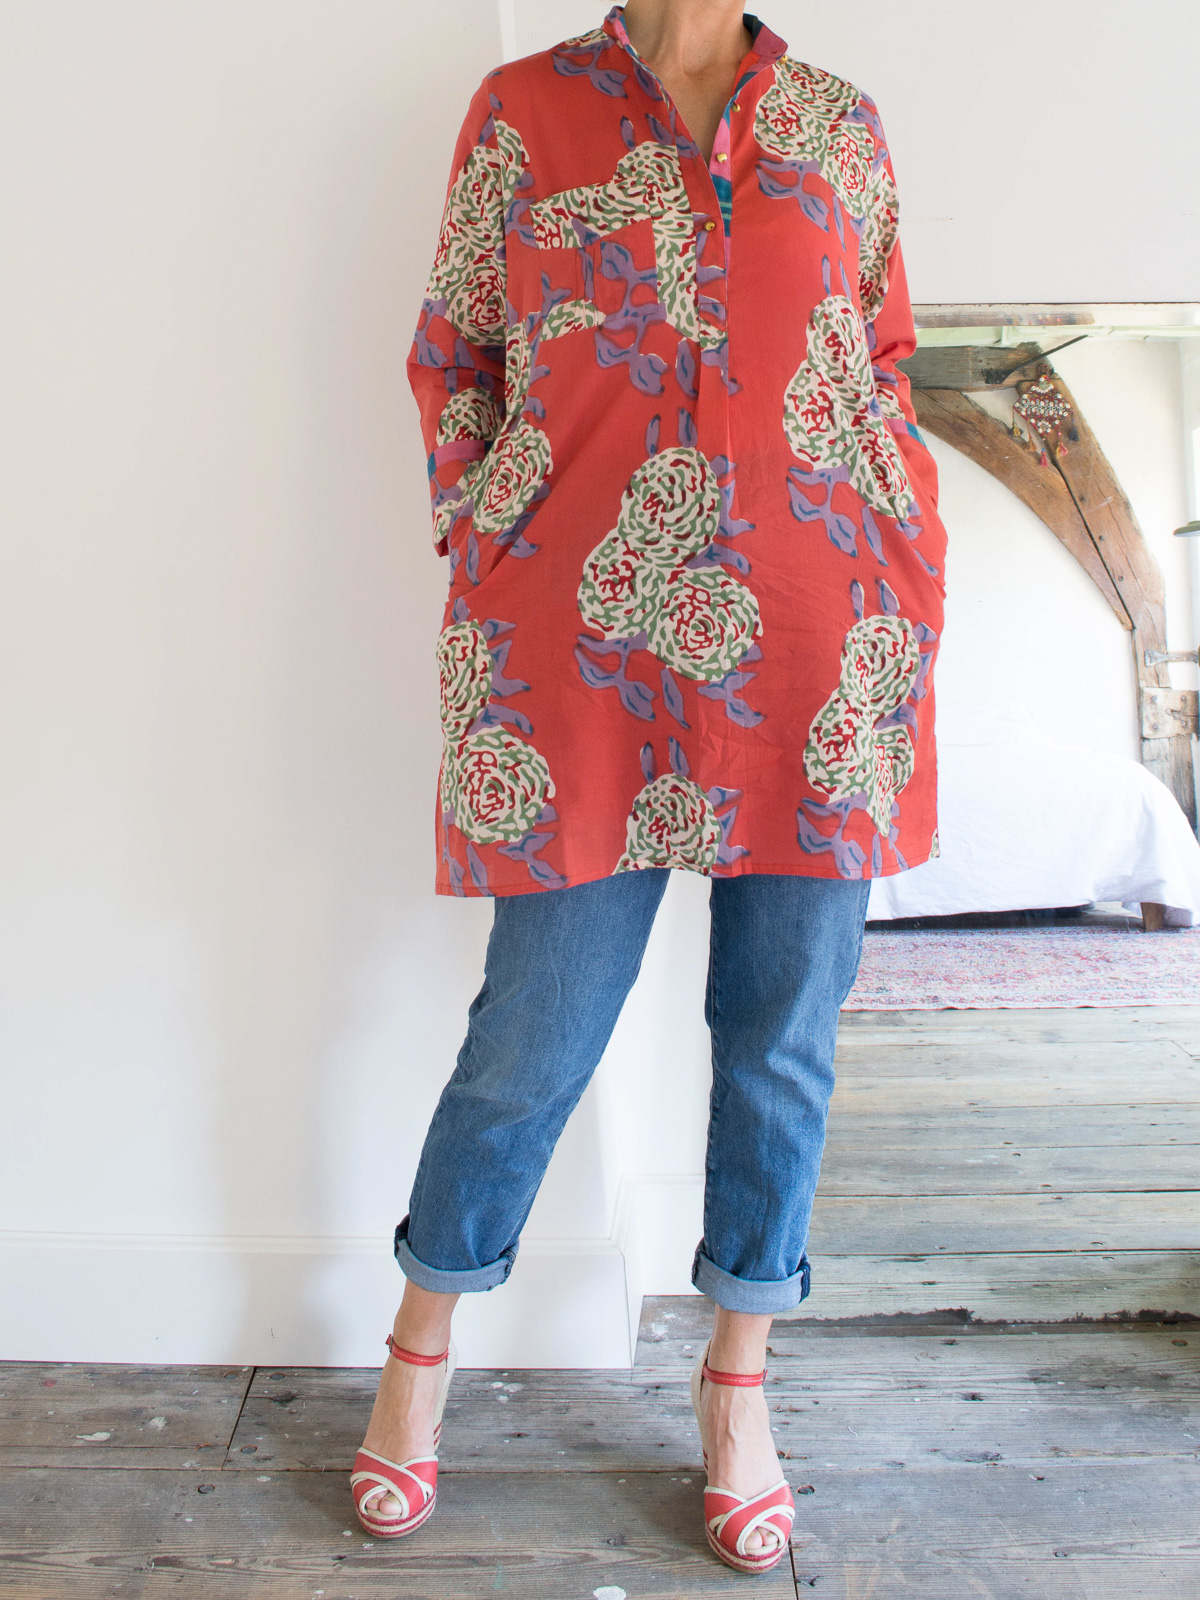 short kurta - brick red with peonies in white, lilac and green